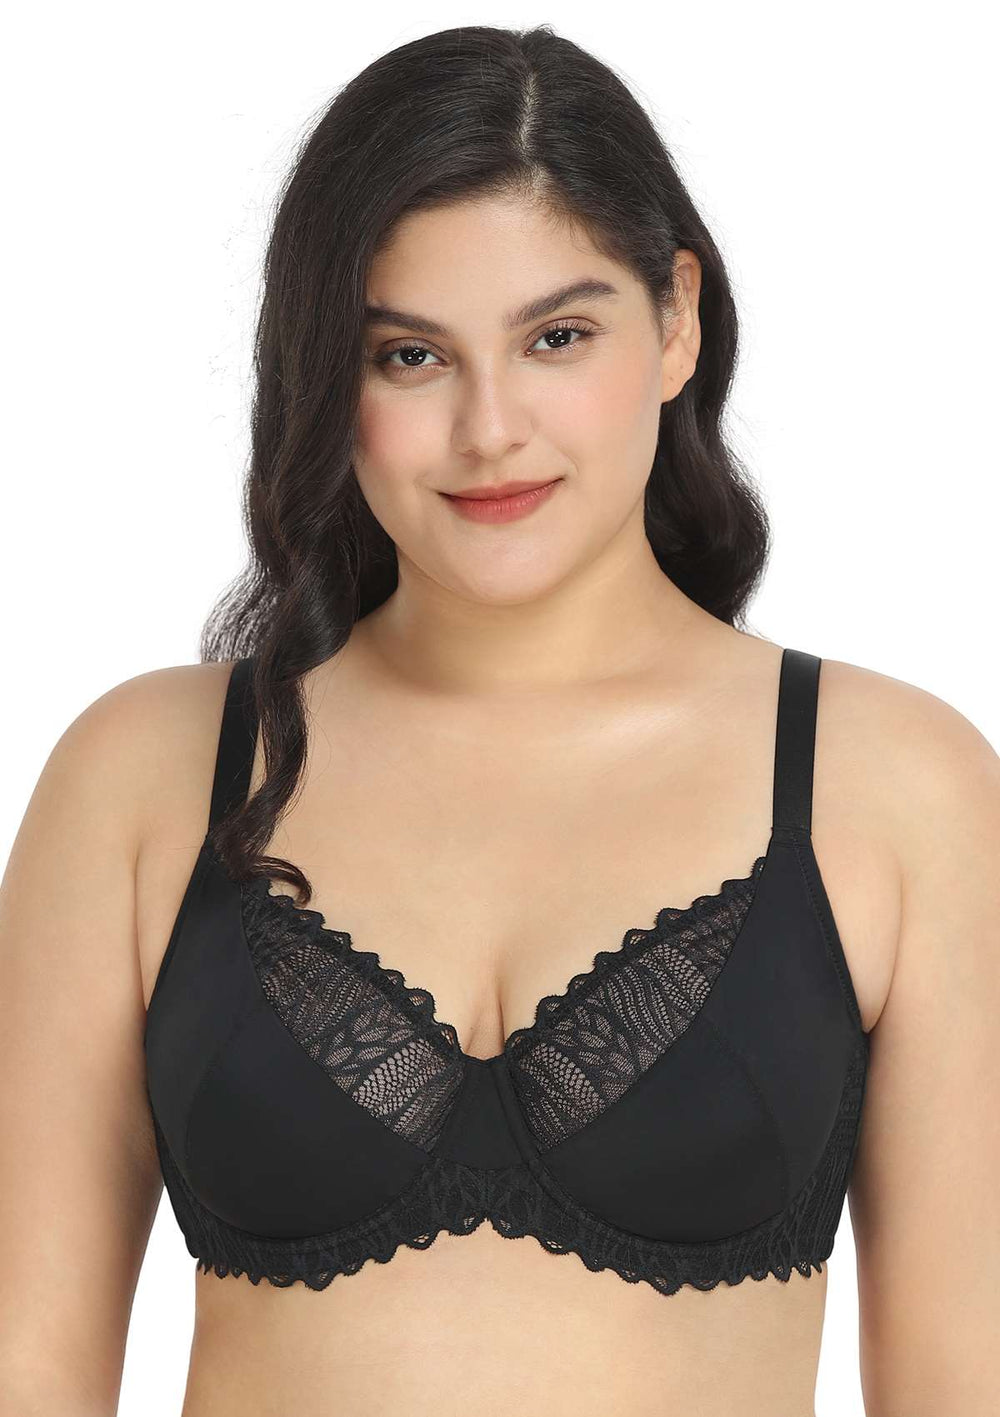 HSIA Minimizer Bra for Women - Plus Size Bra with Underwire Woman's Full  Coverage Lace Bra Unlined Non Padded Bra,Black,44D 